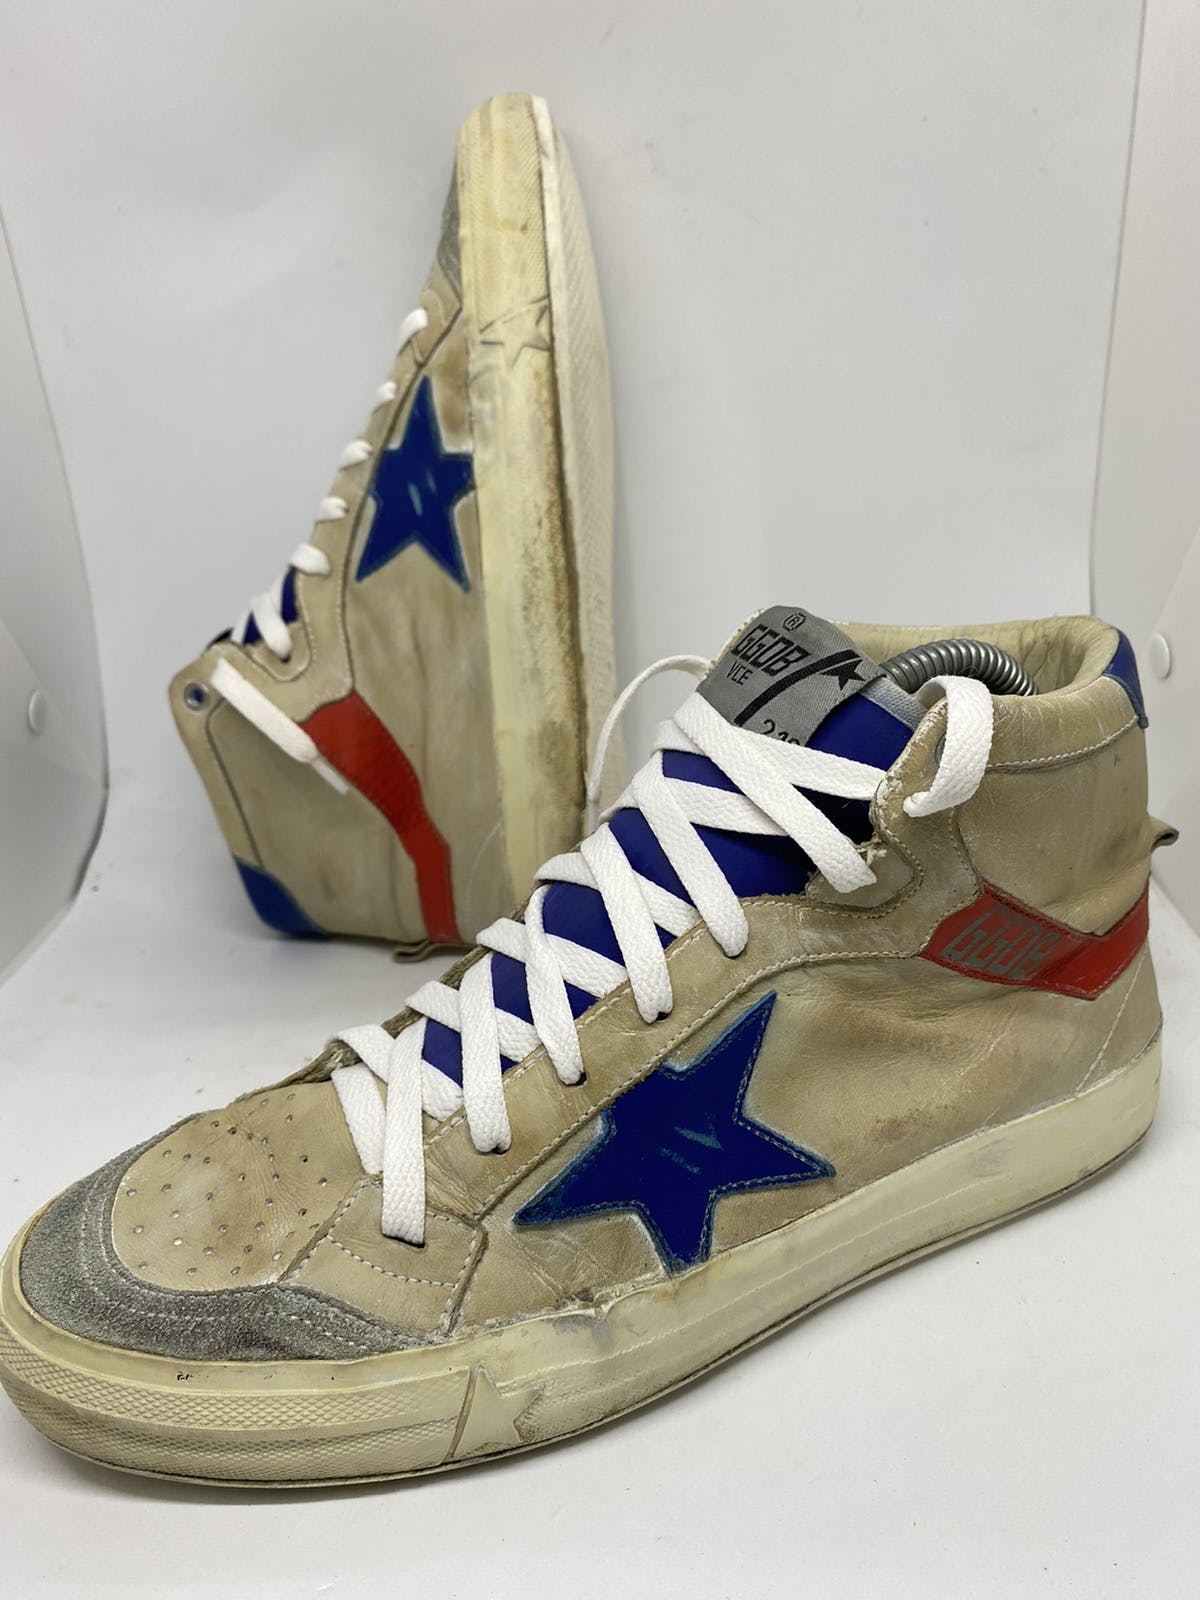 GOLDEN GOOSE vce 2.12 ggdb Sneakers size 41 or us 11 - 6